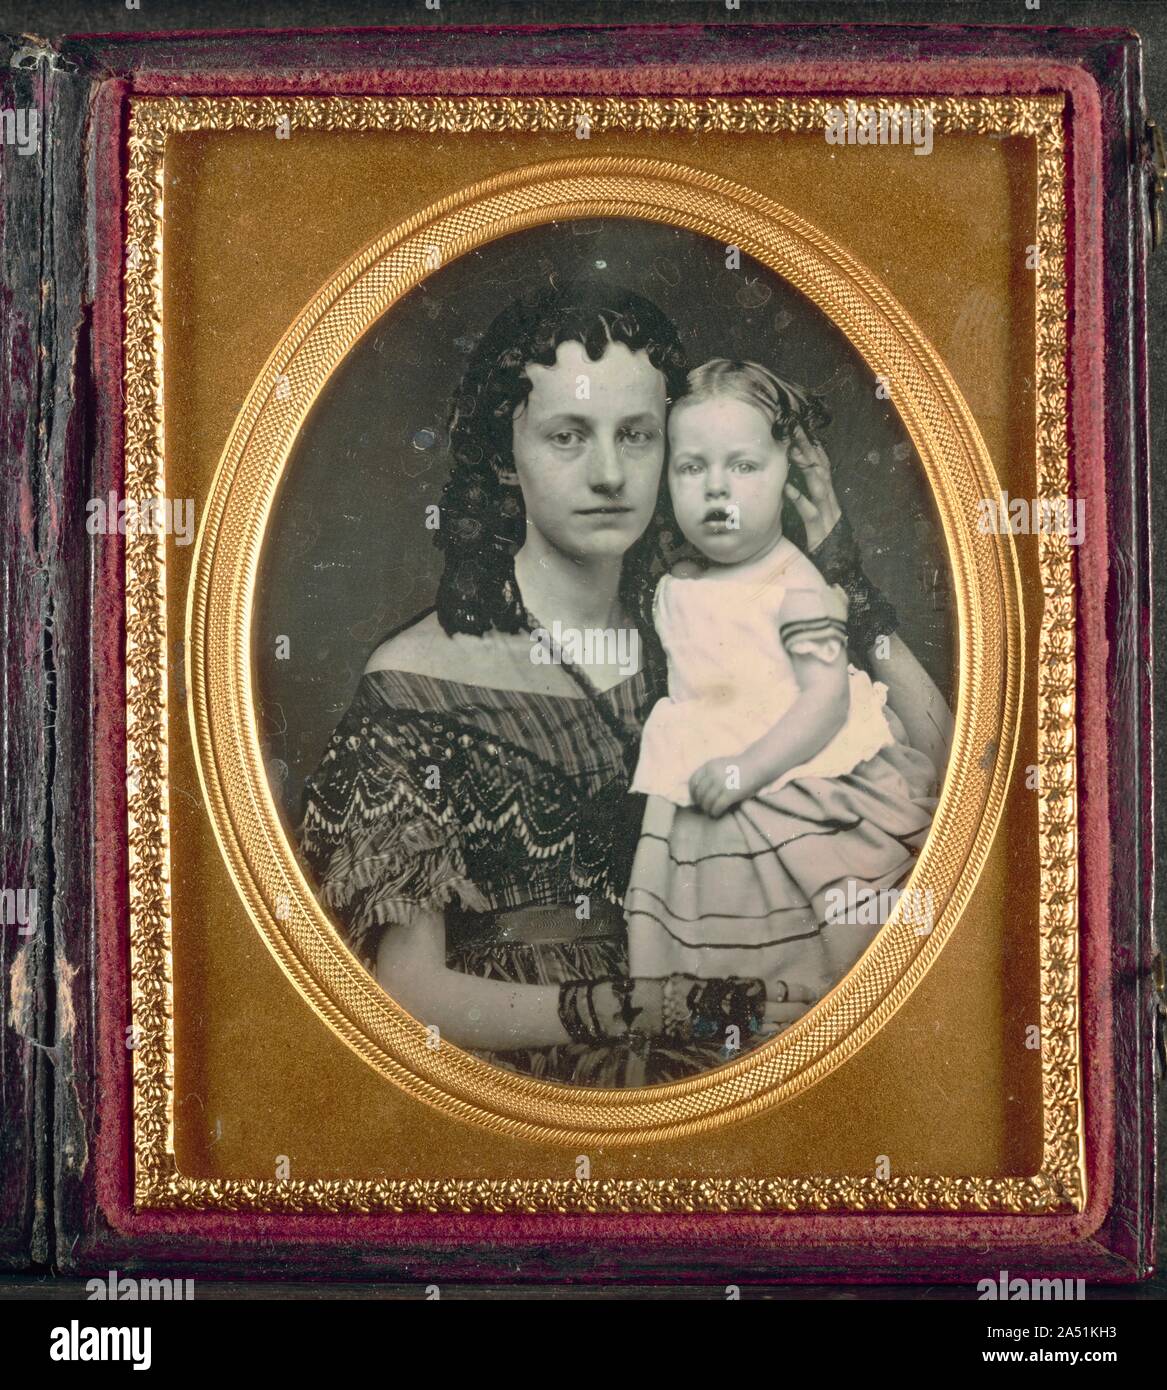 Mother and Child, c. 1855. Some of the most inventive and technically skilled practitioners in the early history of photography are as yet unidentified. However, with time more of these individuals will probably be recognized by name. Introduced into America soon after its invention in 1839 by the Frenchman Louis-Jacques-Mand&#xe9; Daguerre, the daguerreotype flourished from 1840 to the mid-1860s. This beautiful daguerreotype in its original case is an outstanding example of a very popular subject: mother and child. The polished silver plate precisely renders in warm tones the likeness of the Stock Photo